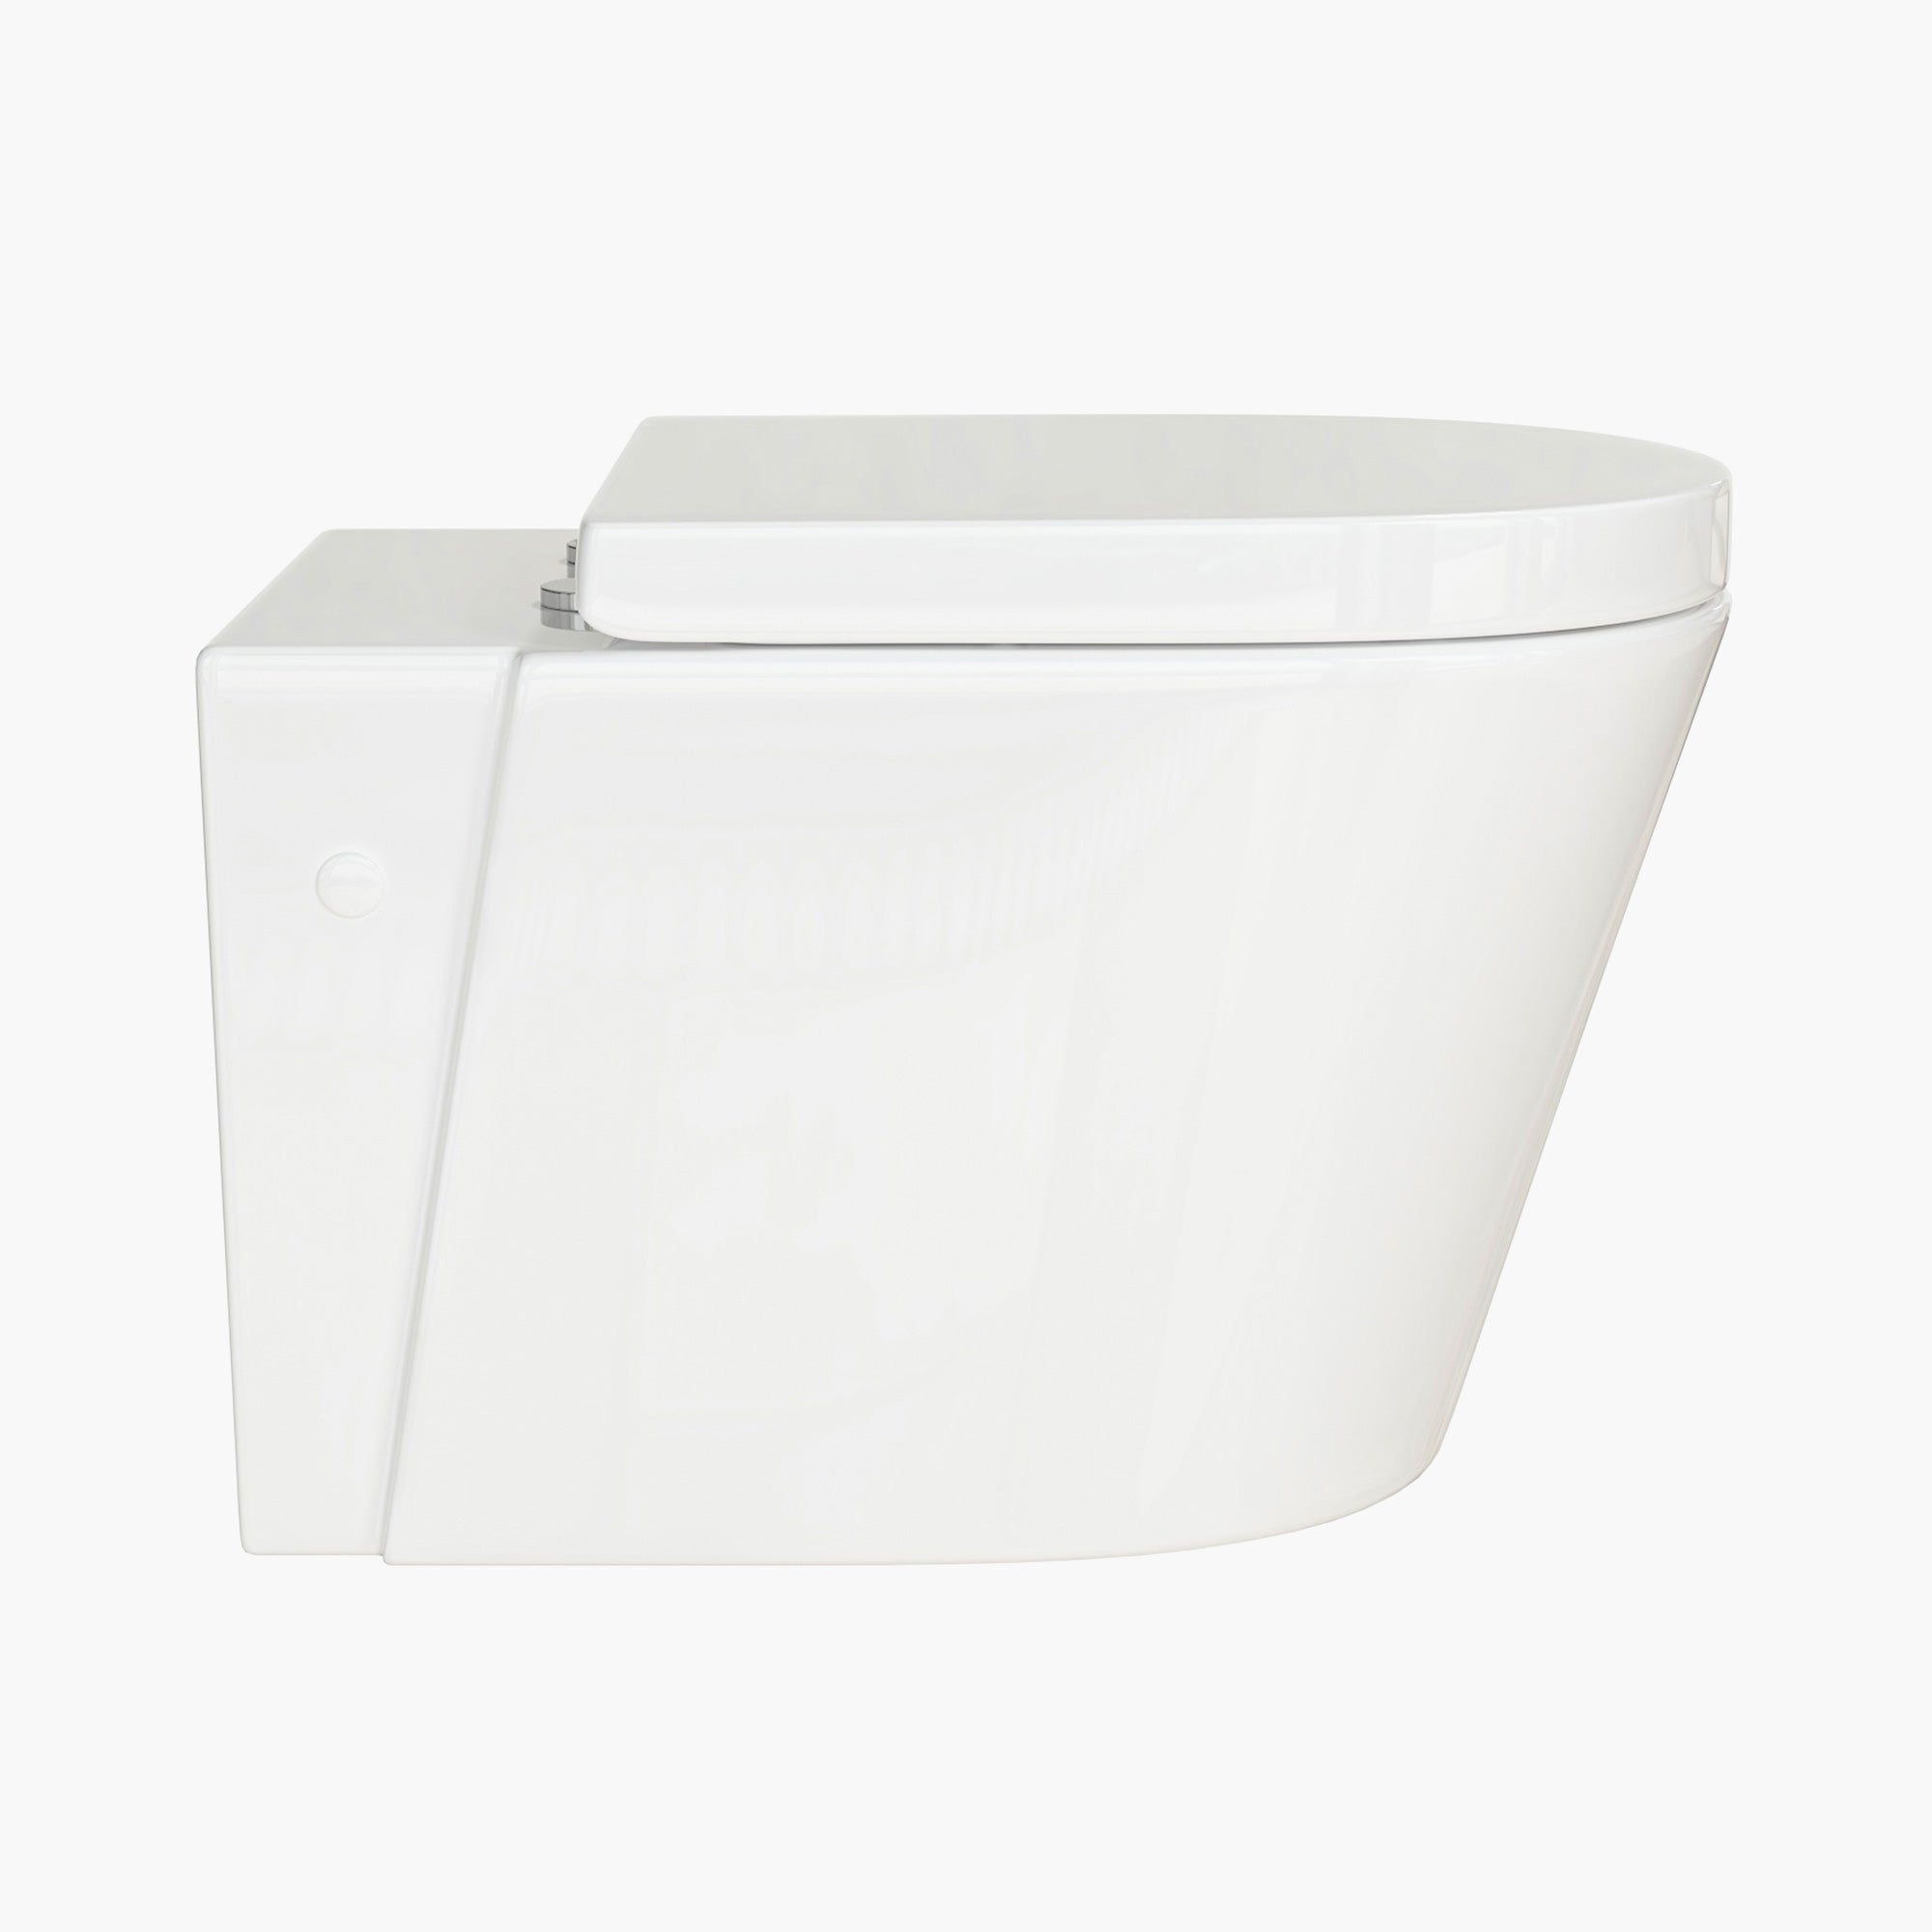 HOROW Modern Wall Hung Toilet With Soft Closing Toilet Seat Model TG02W